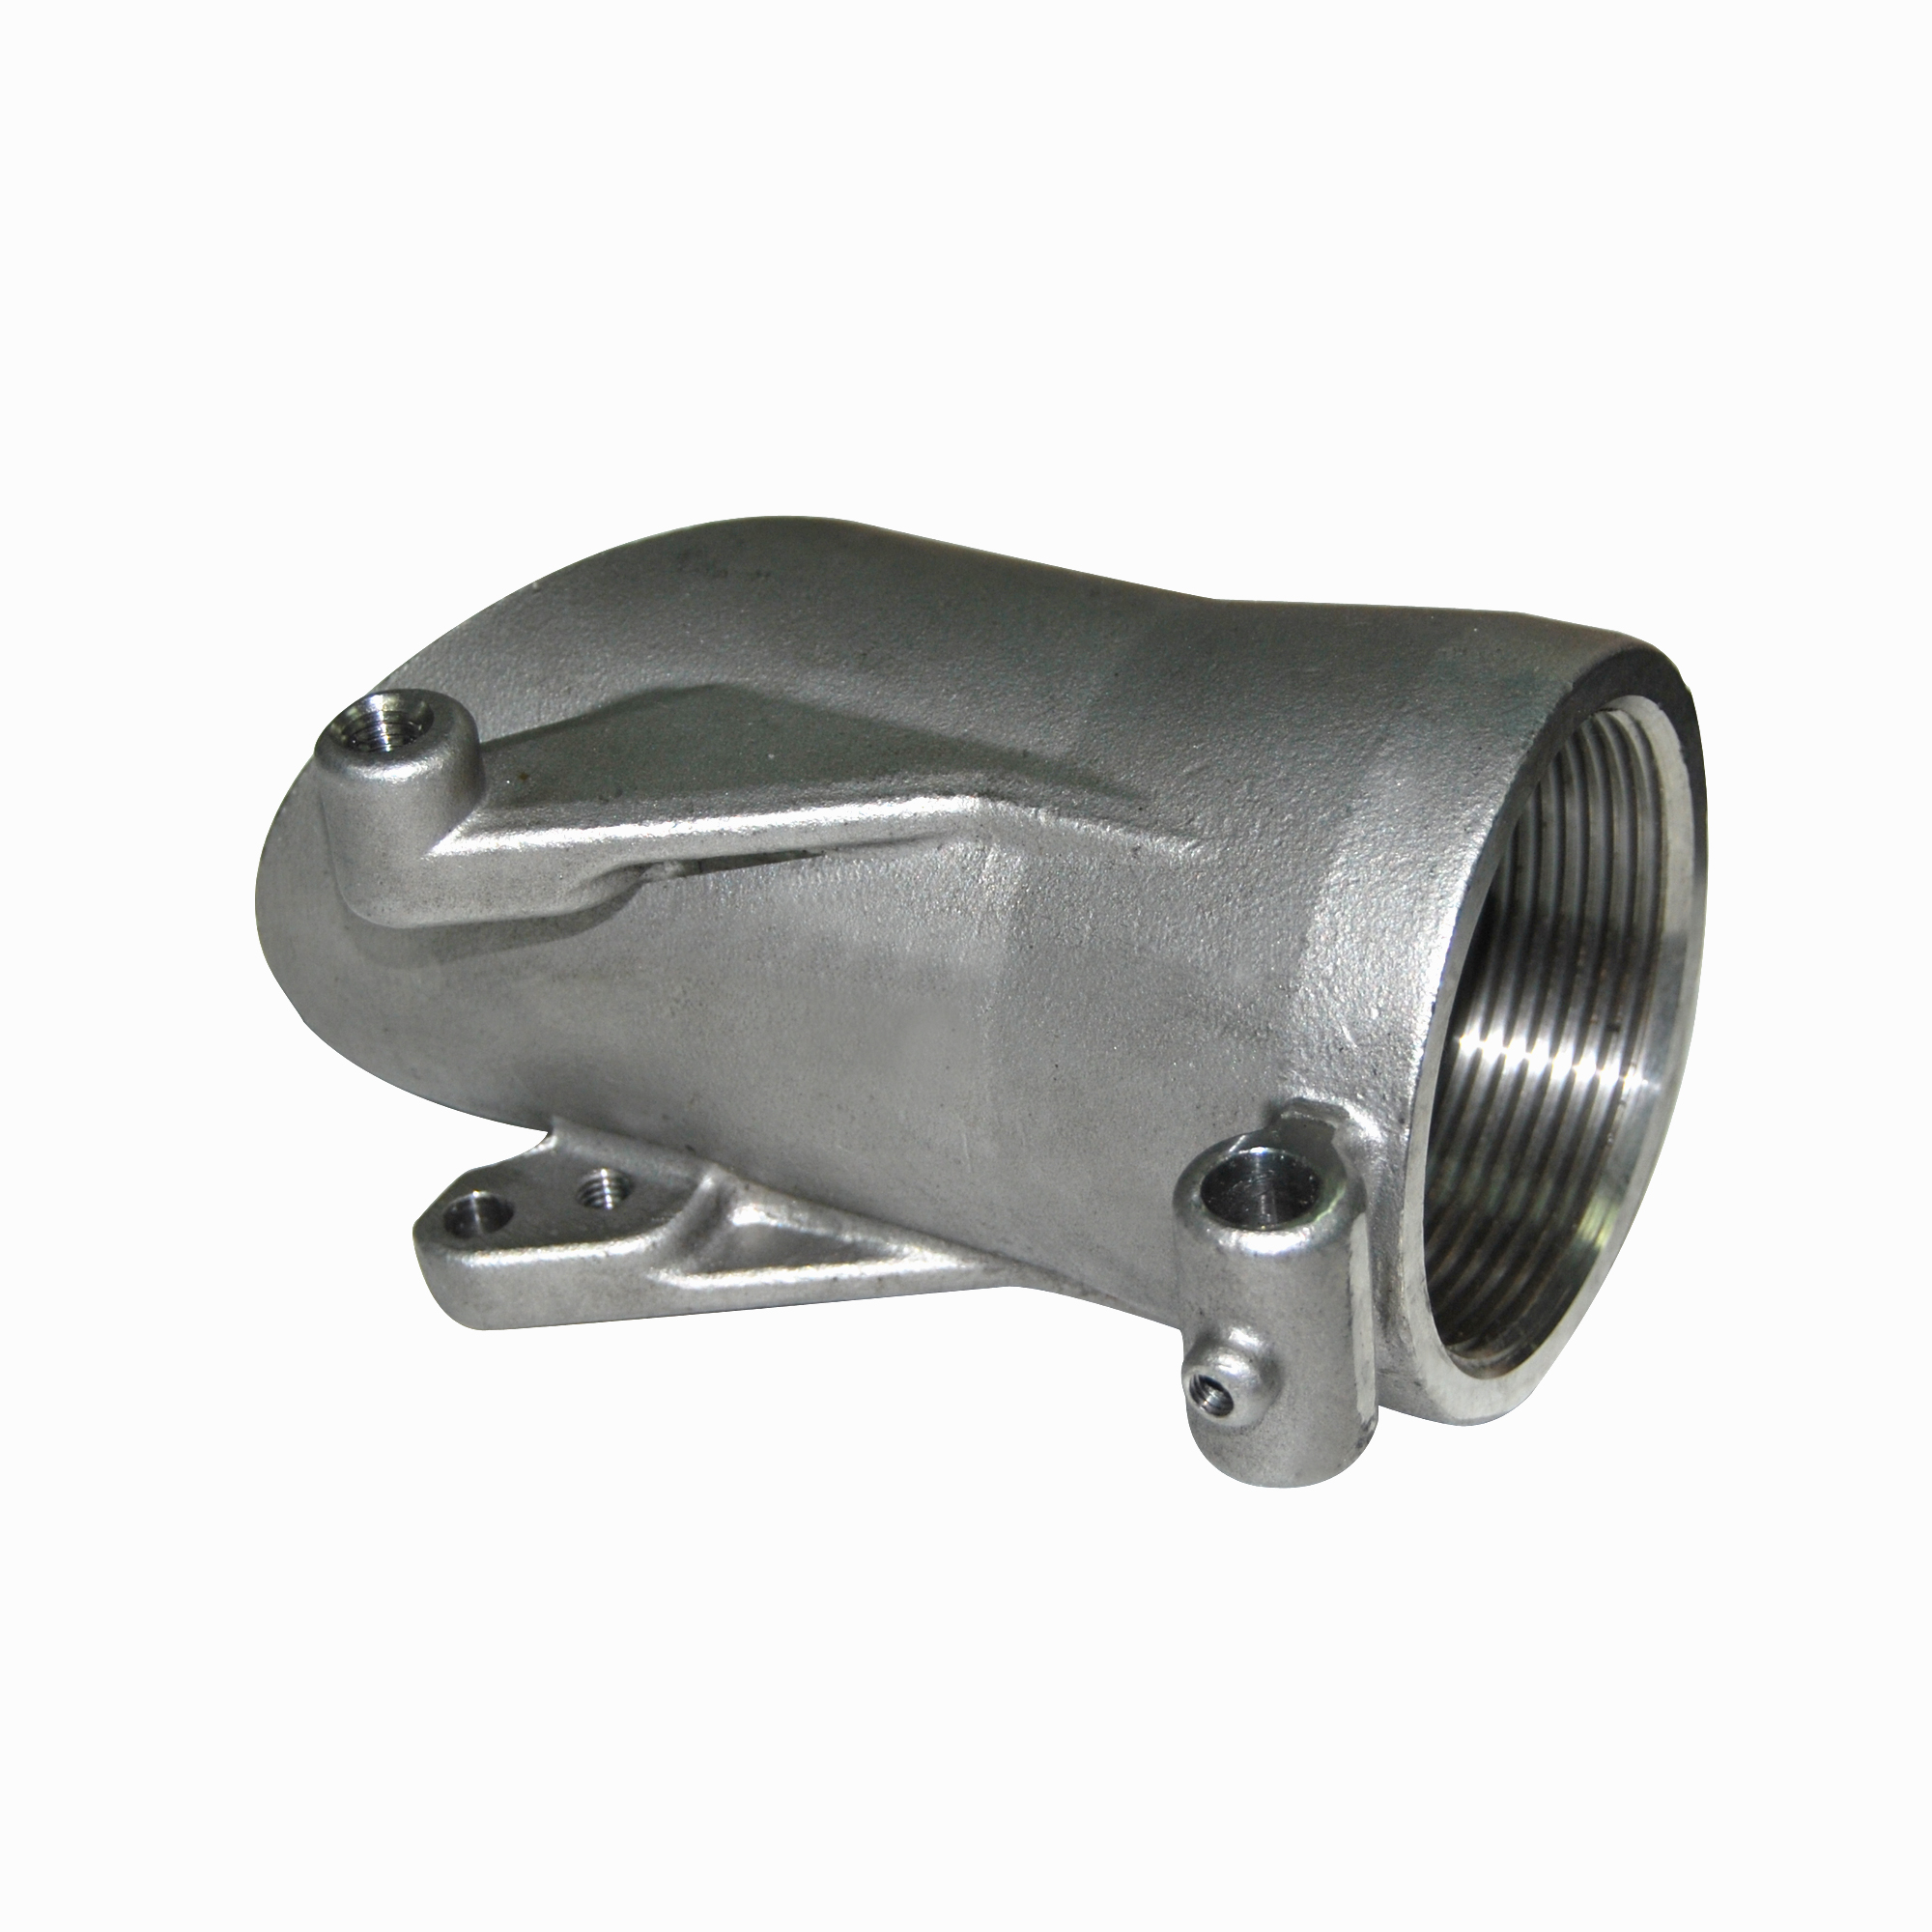 Stainless Steel Investment Casting Product For Agriculture Machine(图4)